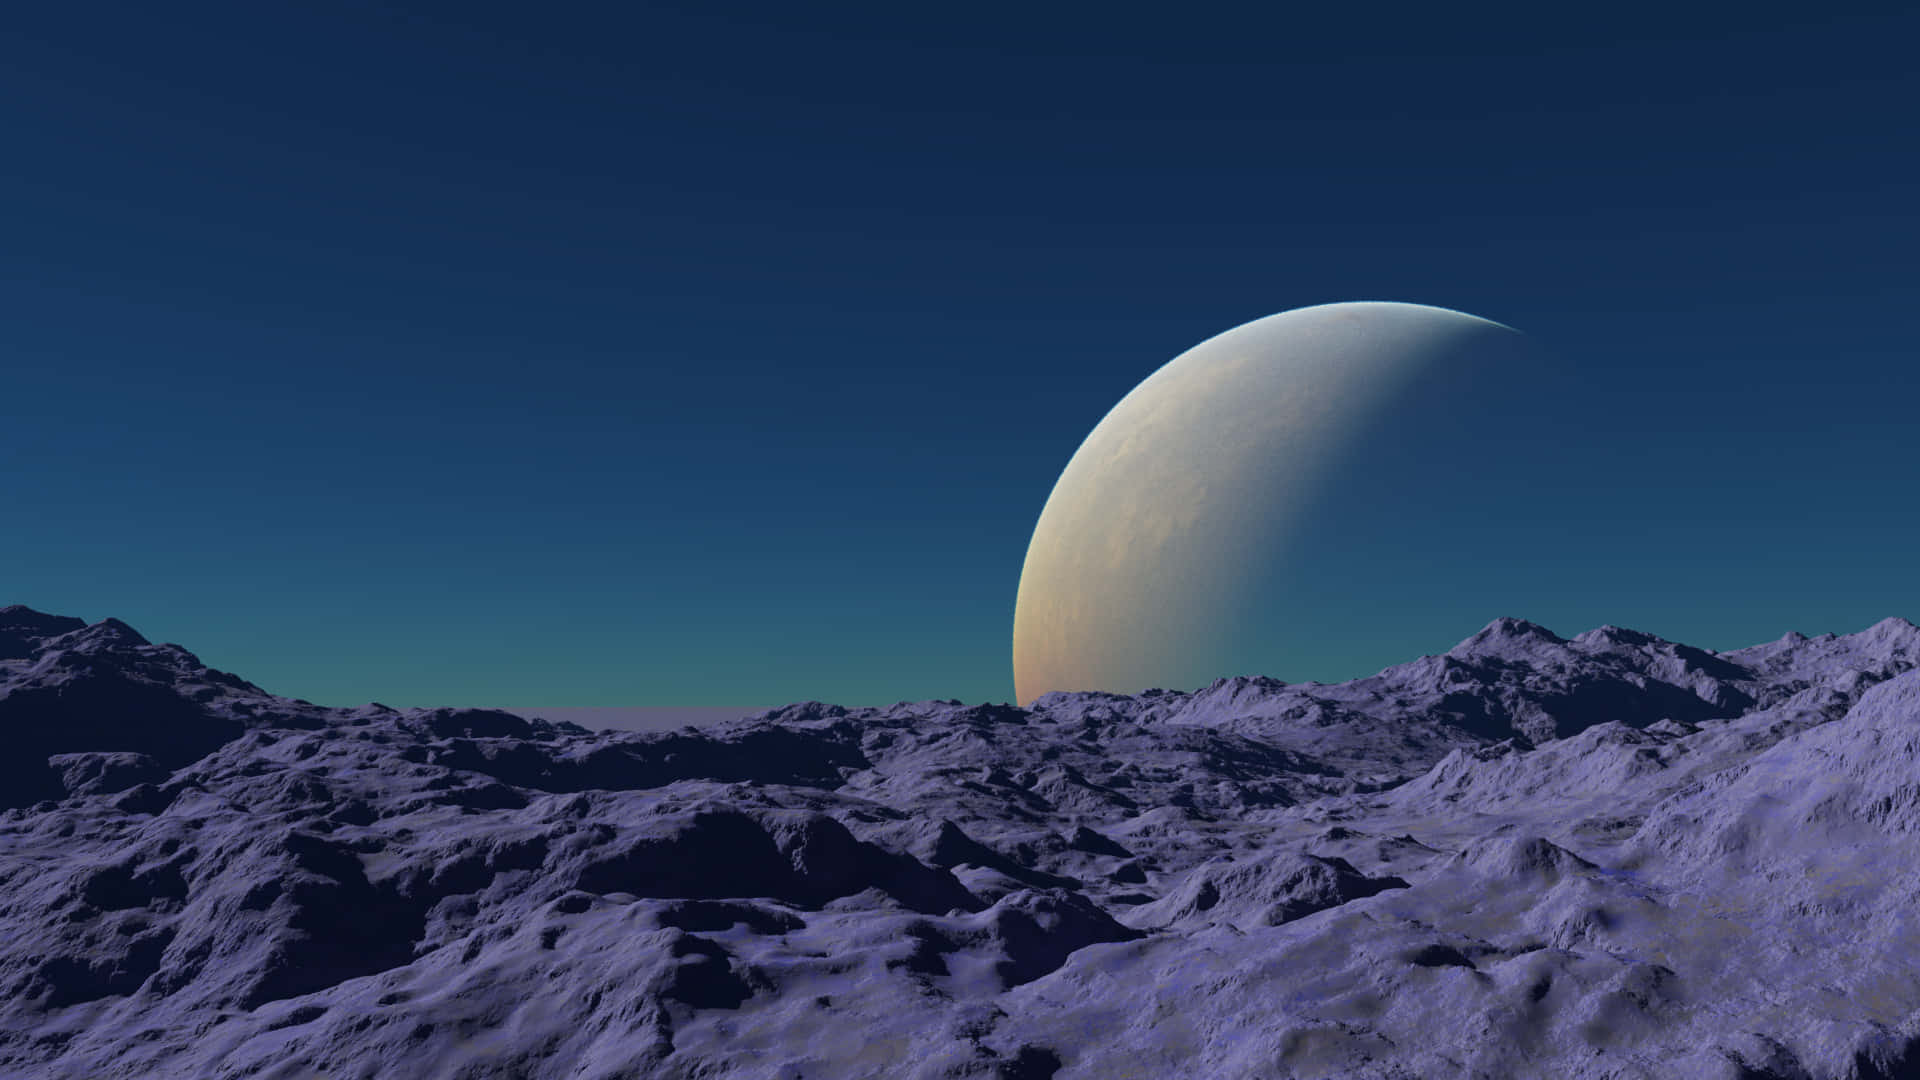 A Planet Is Seen In The Distance Over A Mountain Wallpaper